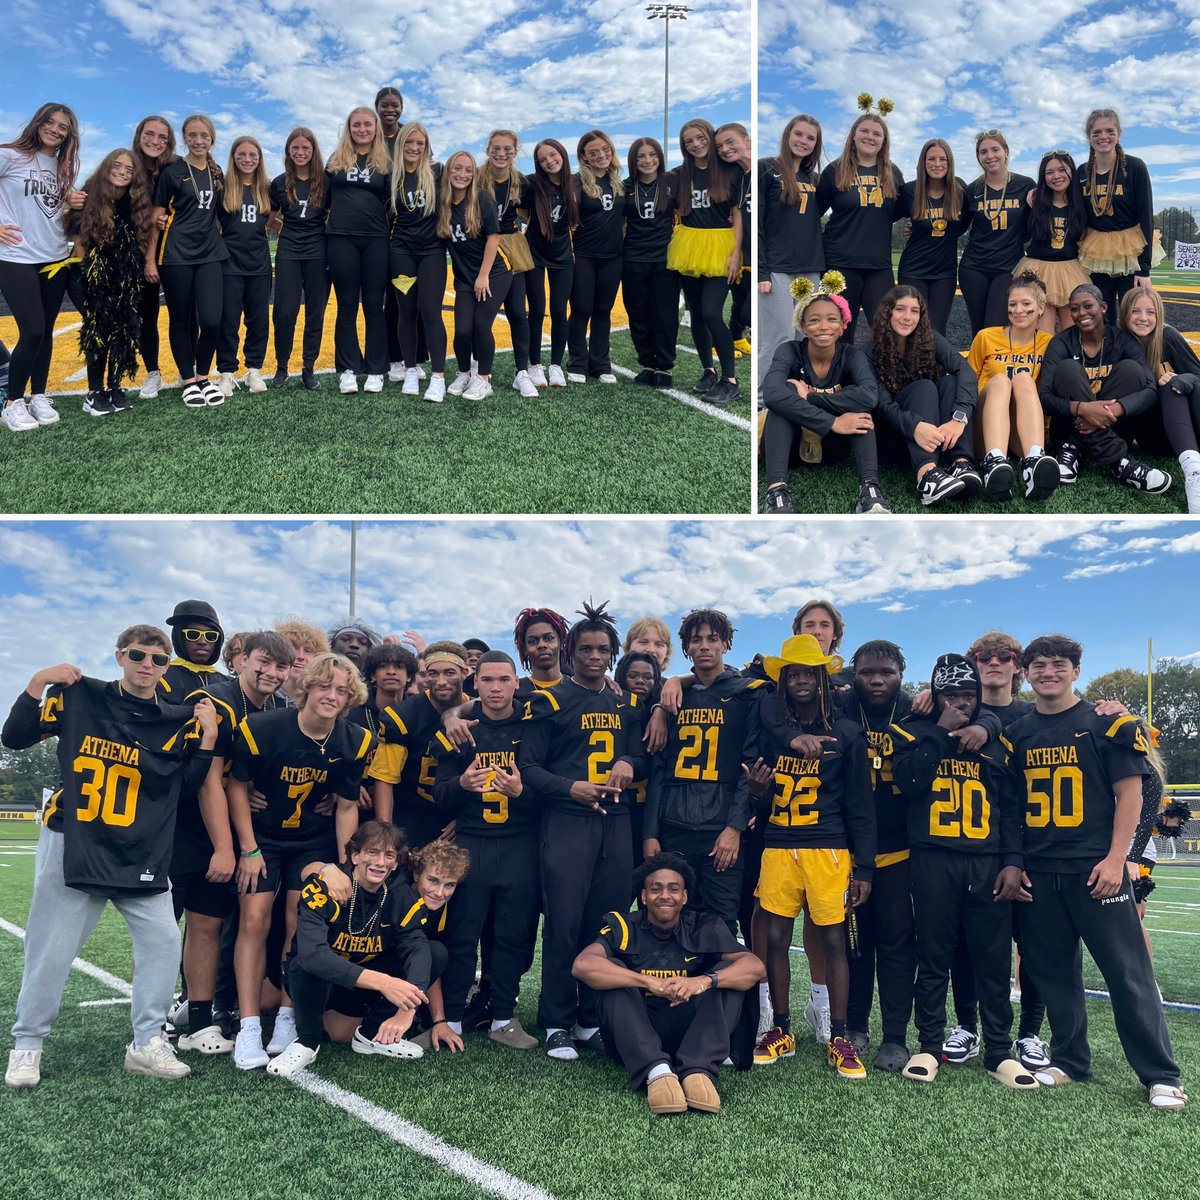 Great athletes… and even better kids! @AthenaHigh @GreeceCentral #TrojanPride 💛🖤